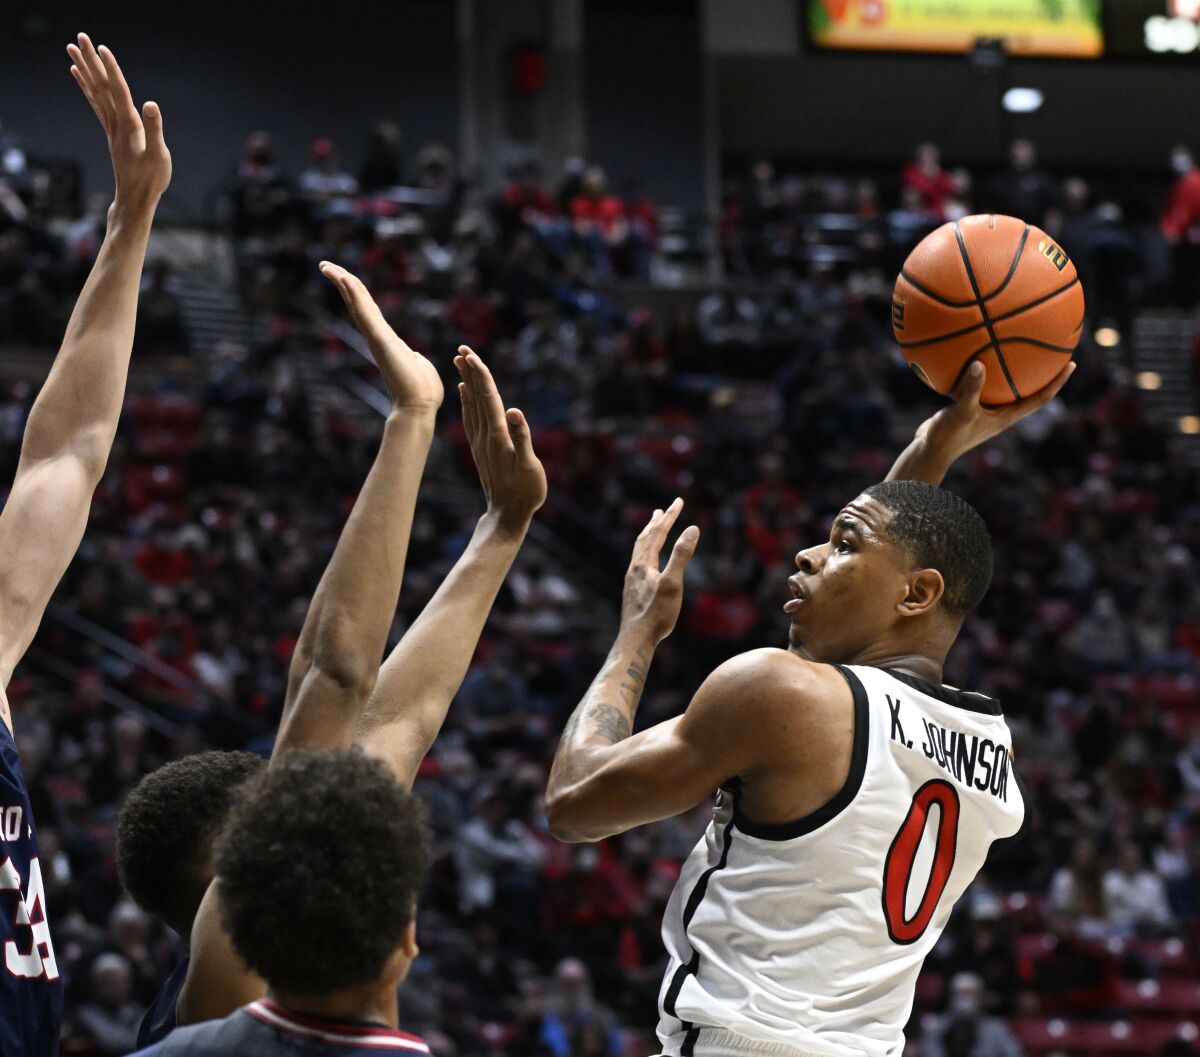 San Diego State Aztecs forward Keshad Johnson shoots over Fresno State Bulldogs defenders during the first half on Thursday.